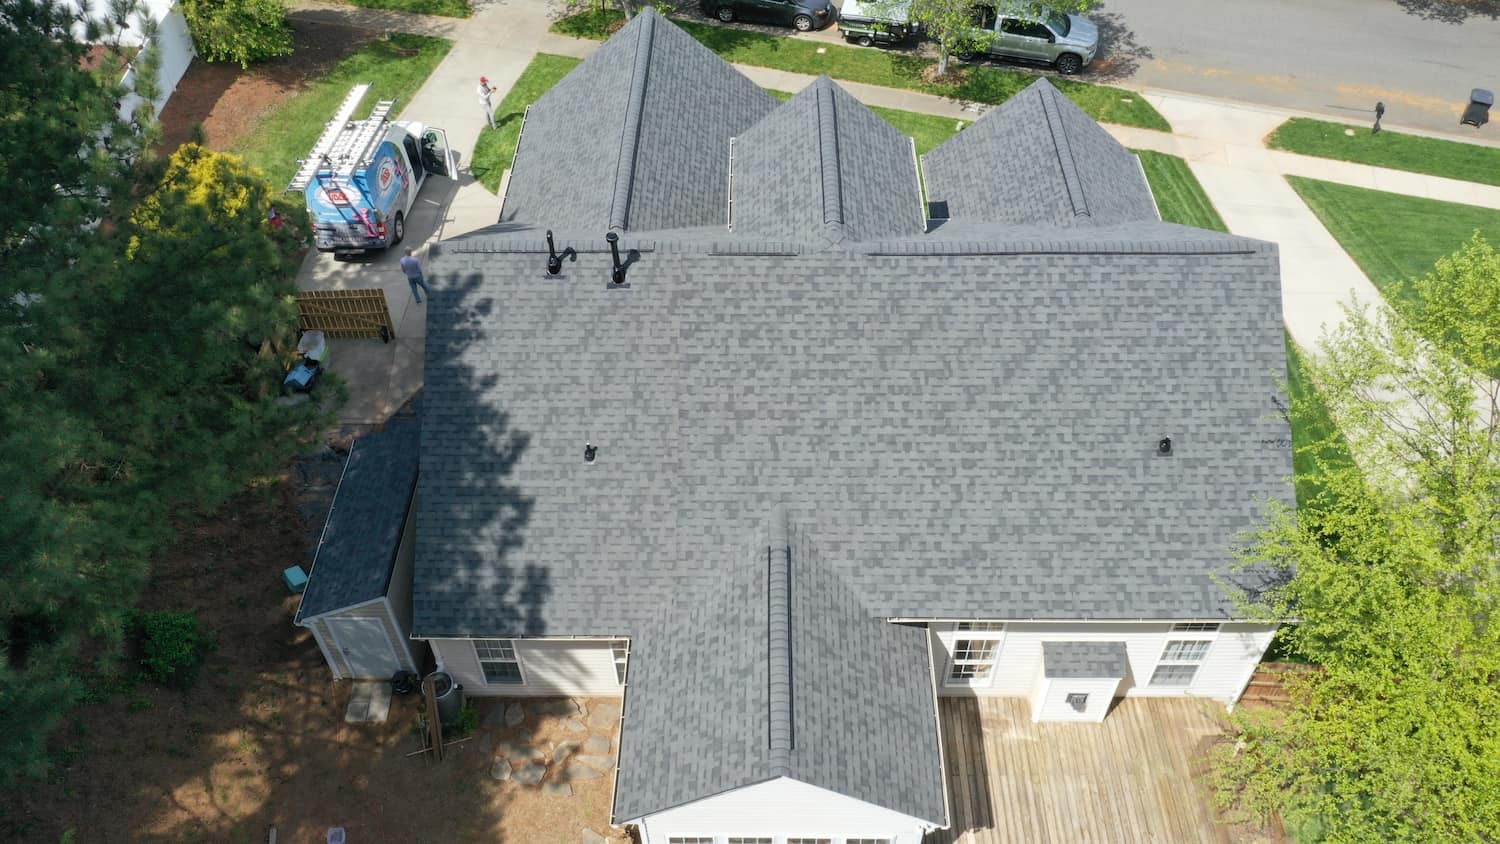 http://aerial%20view%20of%20back%20of%20home%20residential%20home%20with%20trudefinition%20gray%20shingles